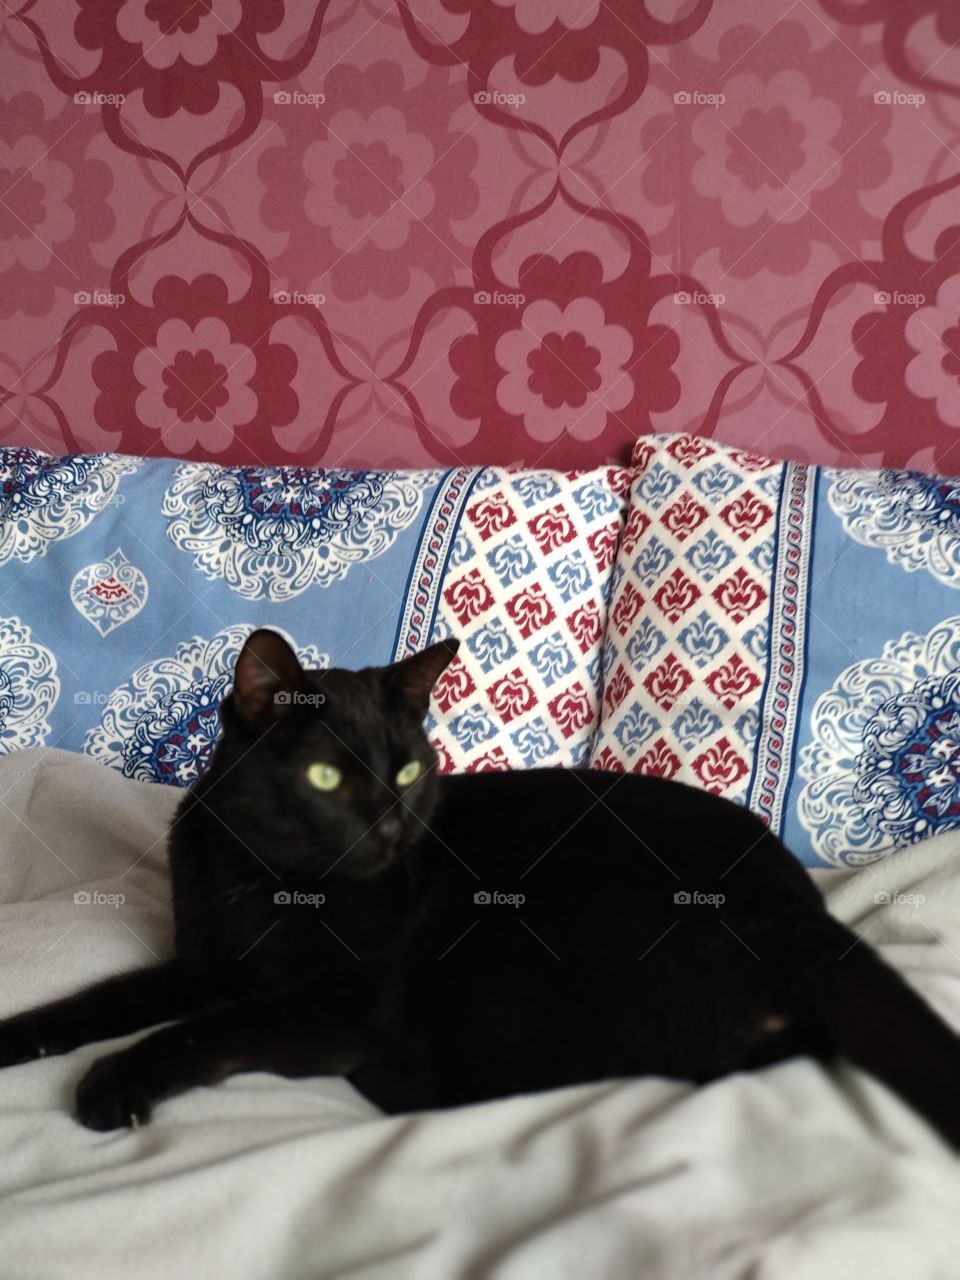 Black cat in the bed resting